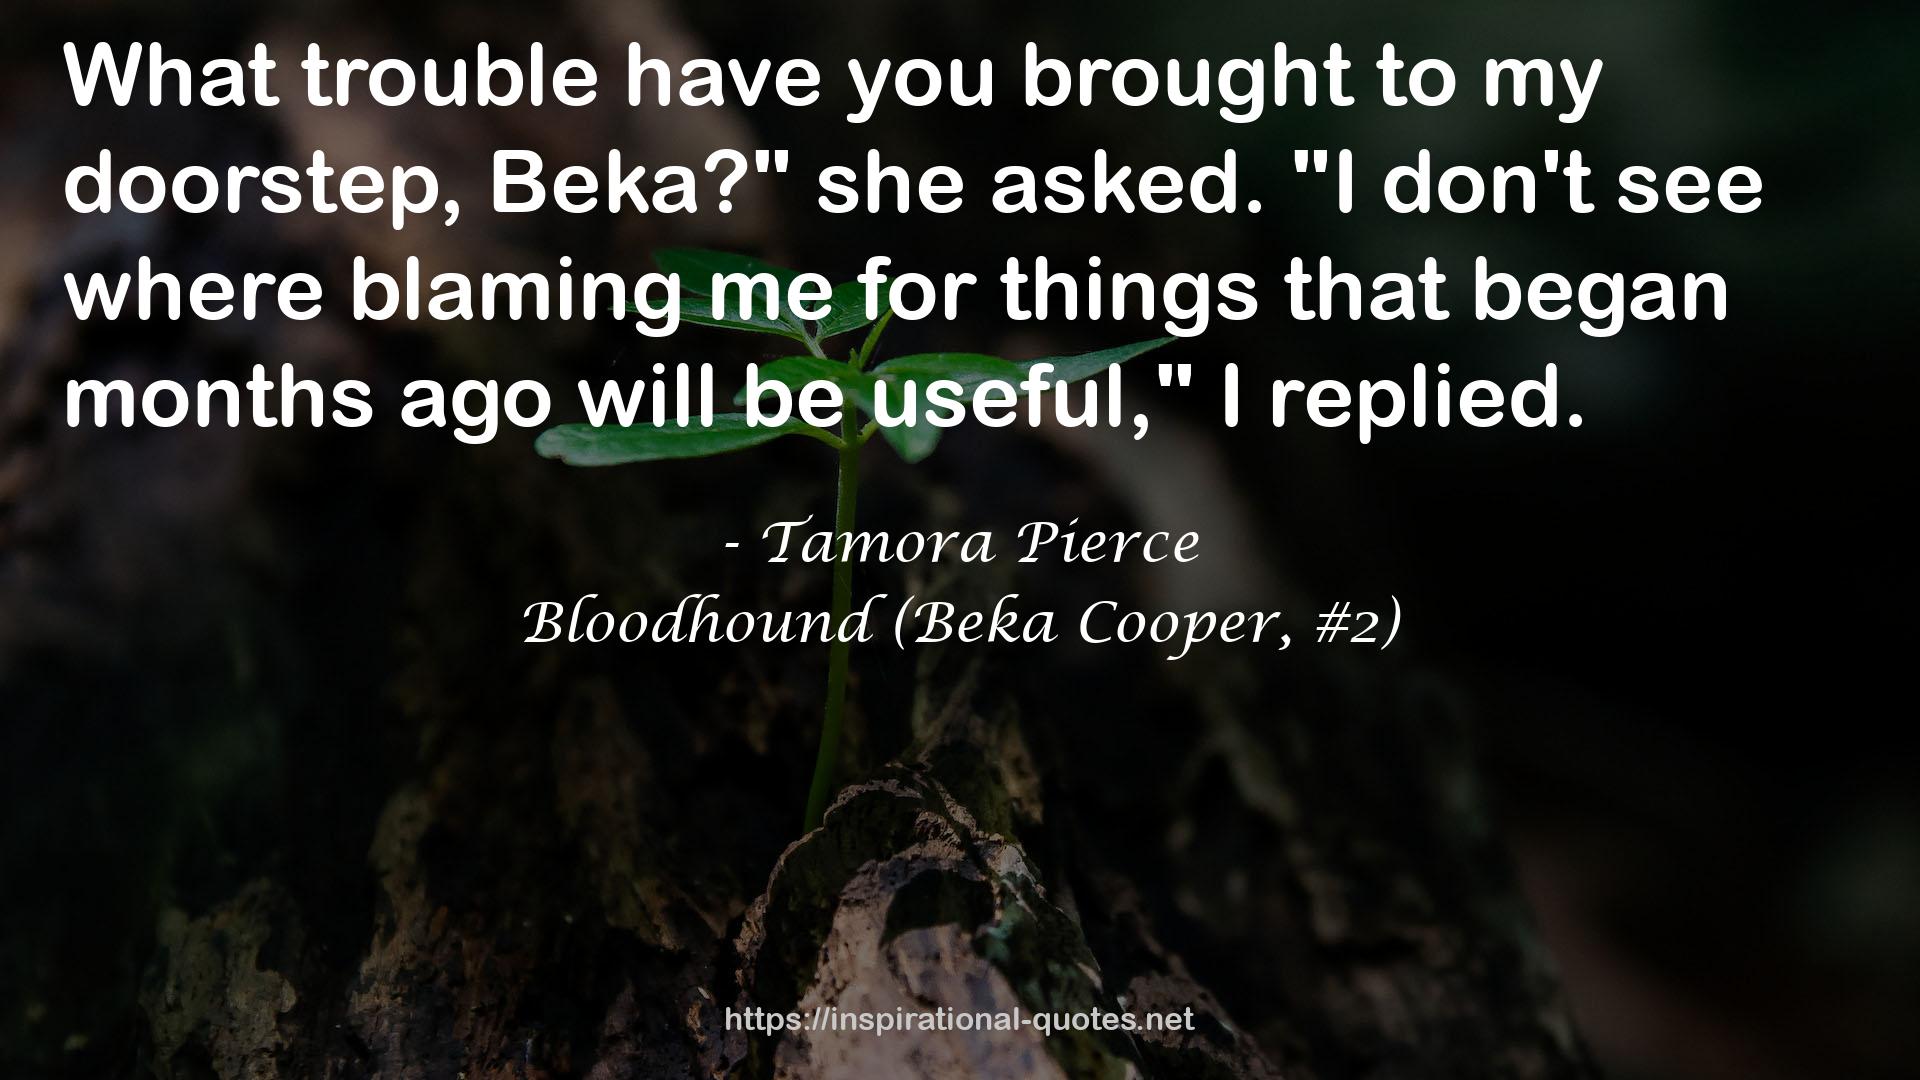 Bloodhound (Beka Cooper, #2) QUOTES